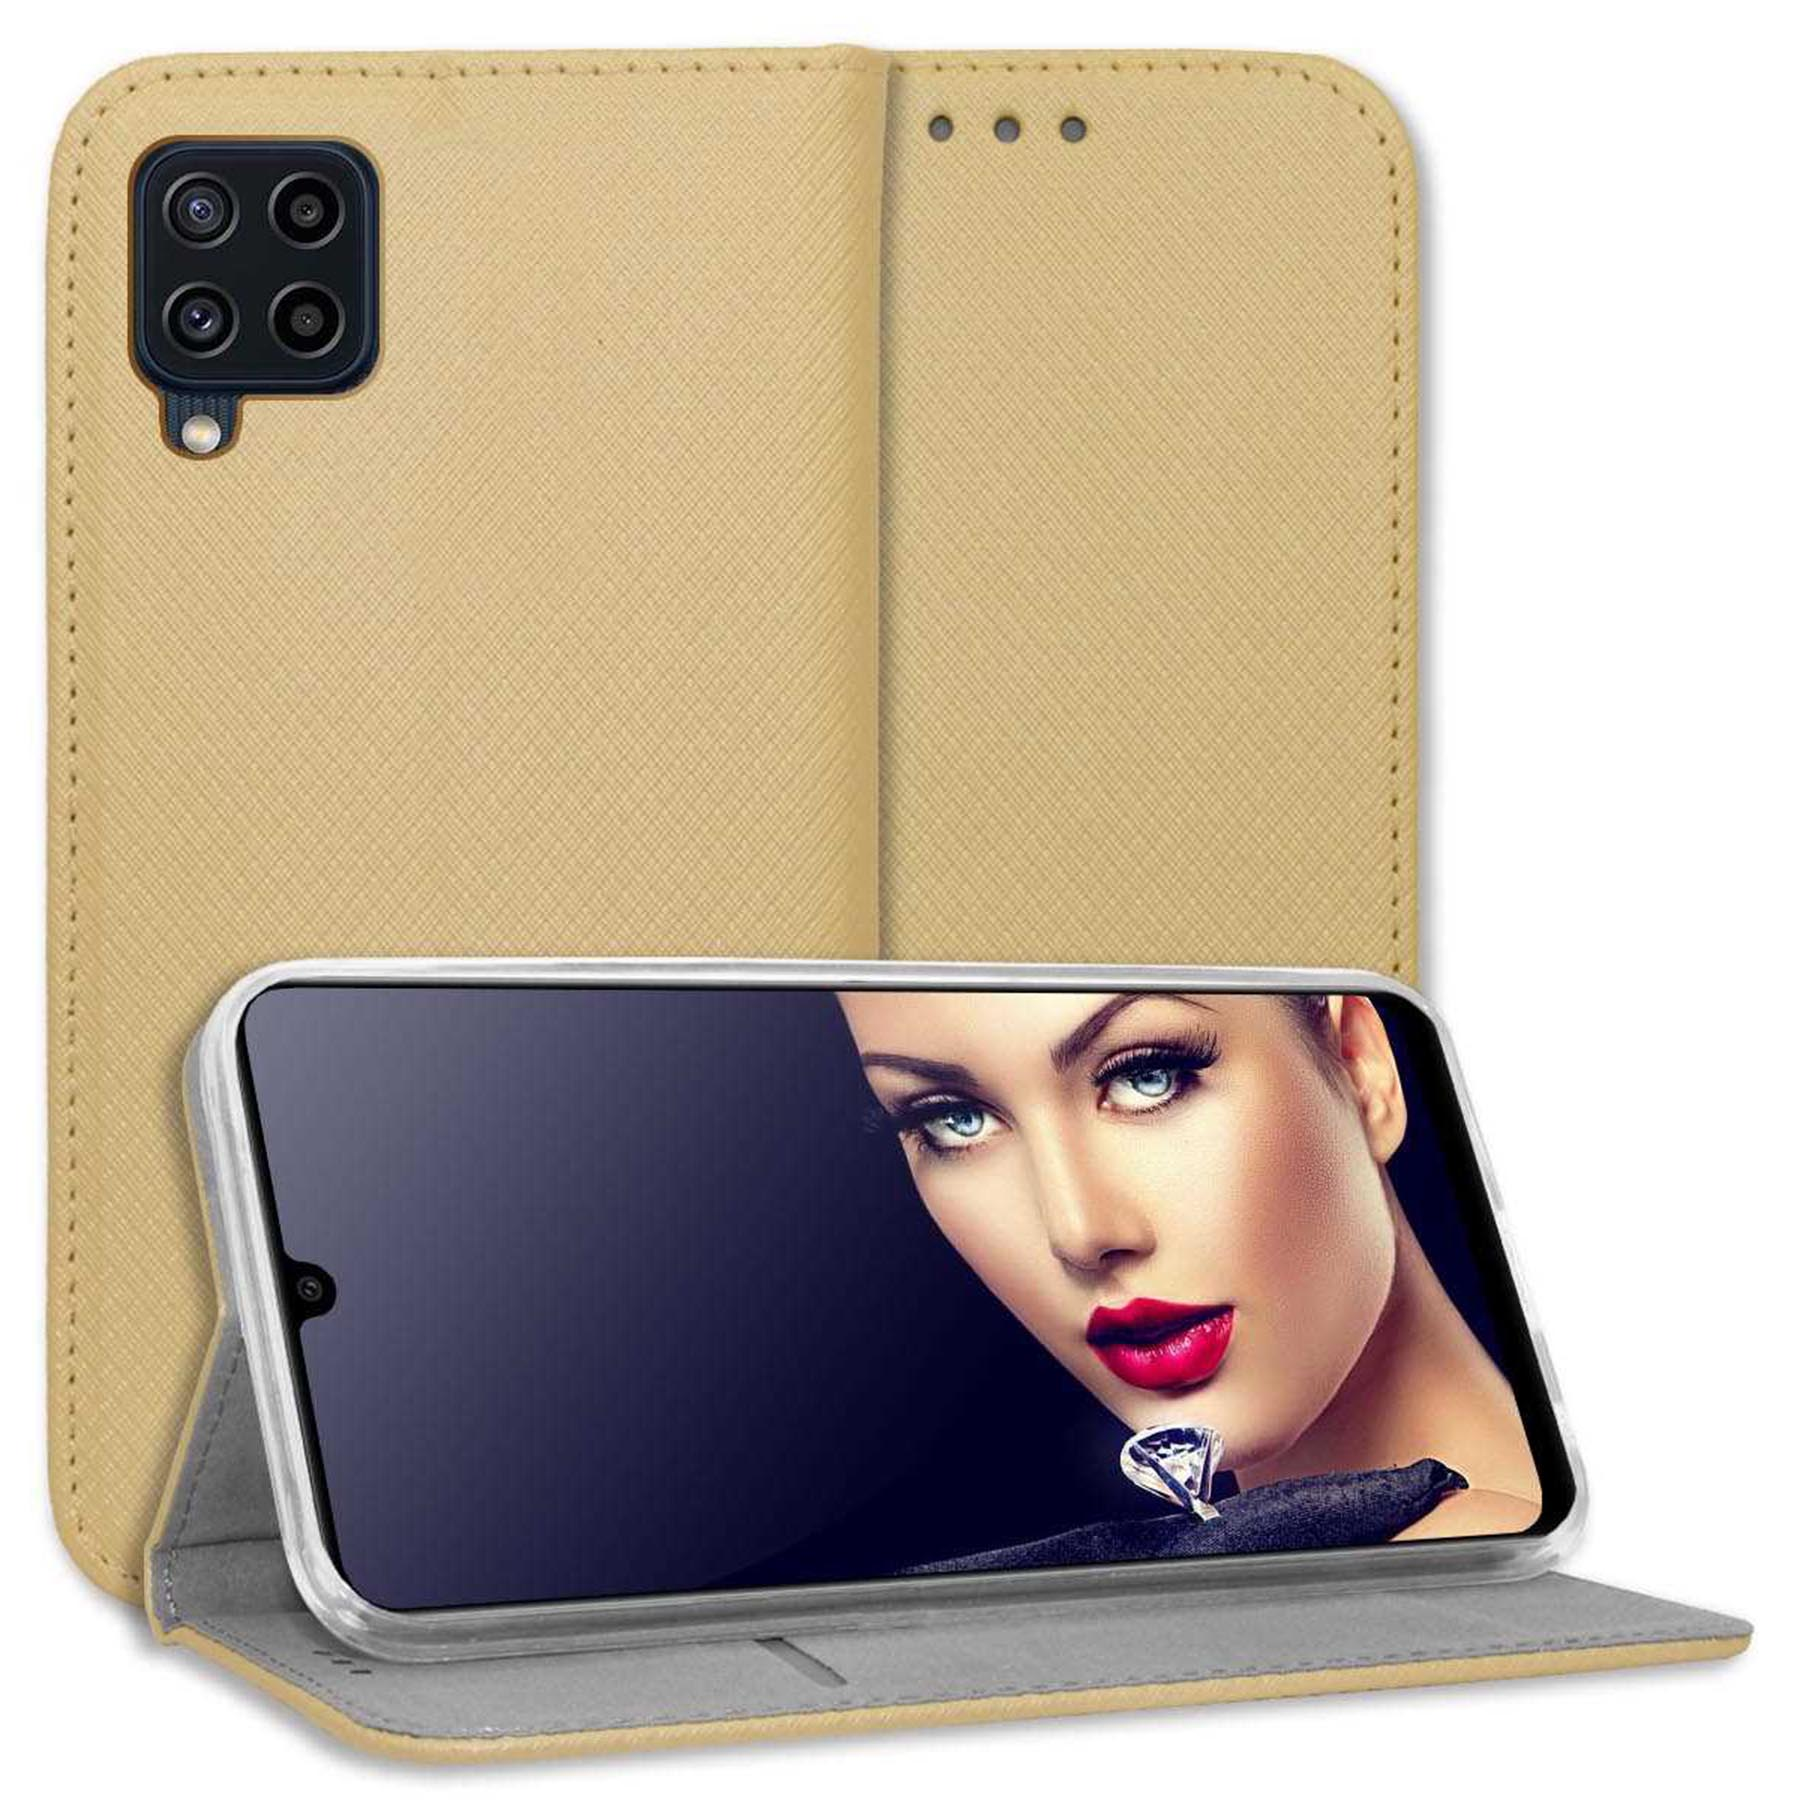 MTB MORE ENERGY Smart A16s, A16, Oppo, Gold Bookcover, Klapphülle, A54s, Magnet